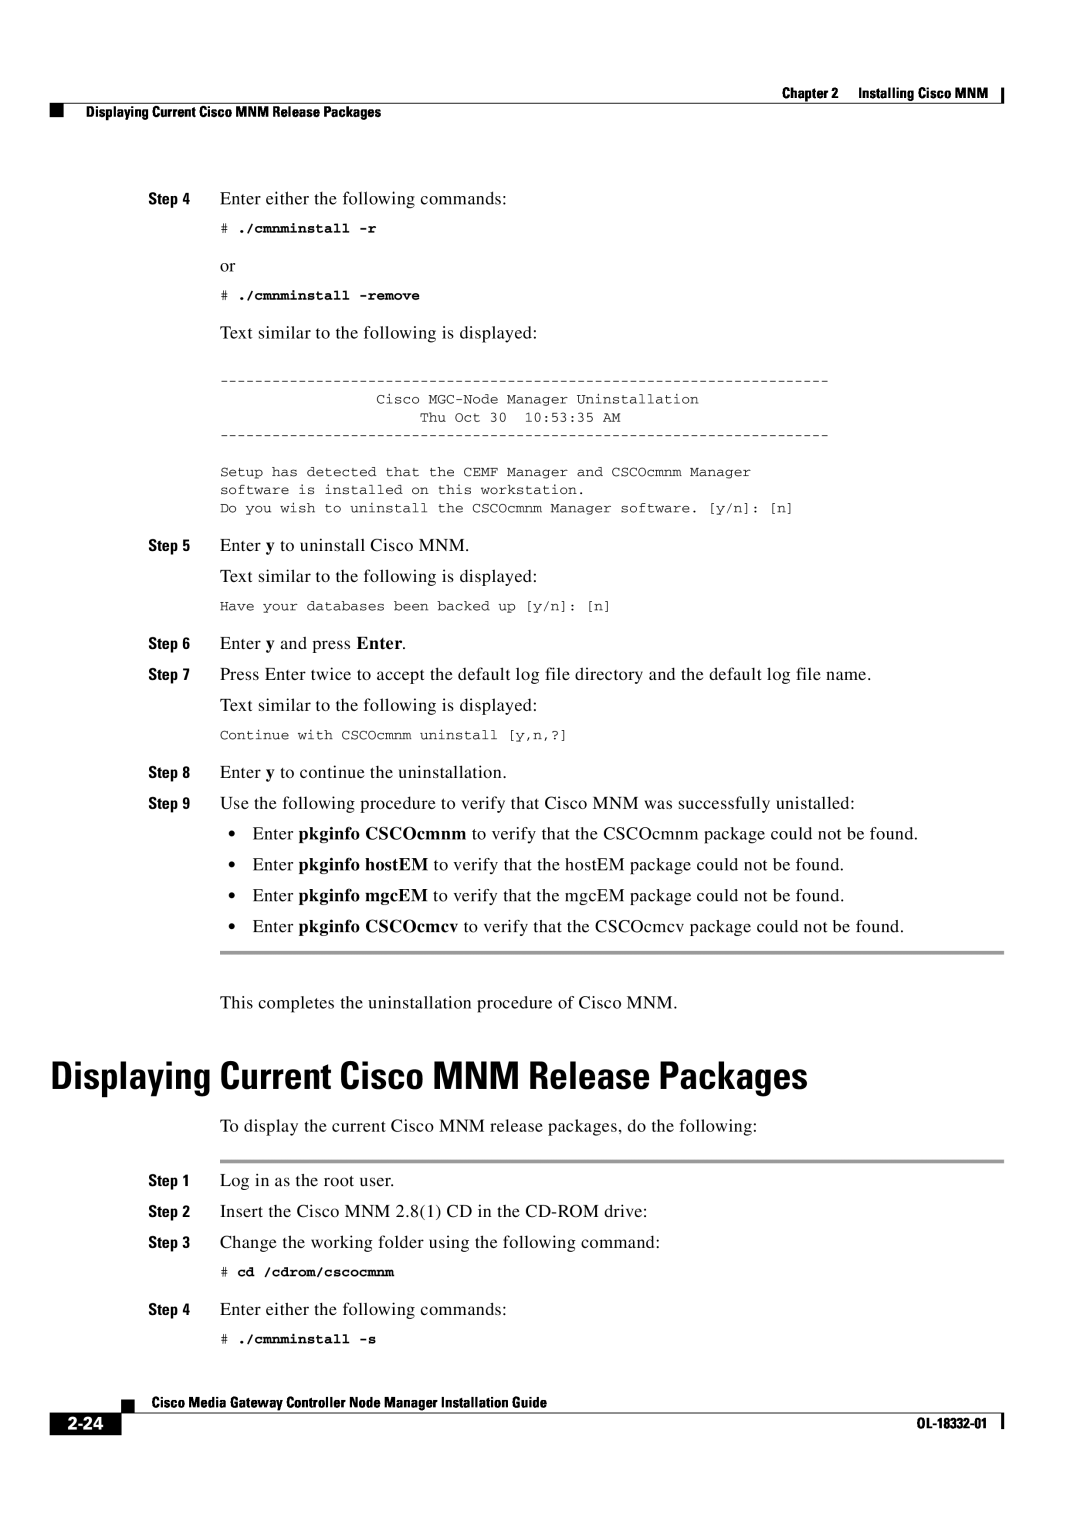 Cisco Systems Media Gateway Controller Node Manager manual Displaying Current Cisco MNM Release Packages, 2-24 